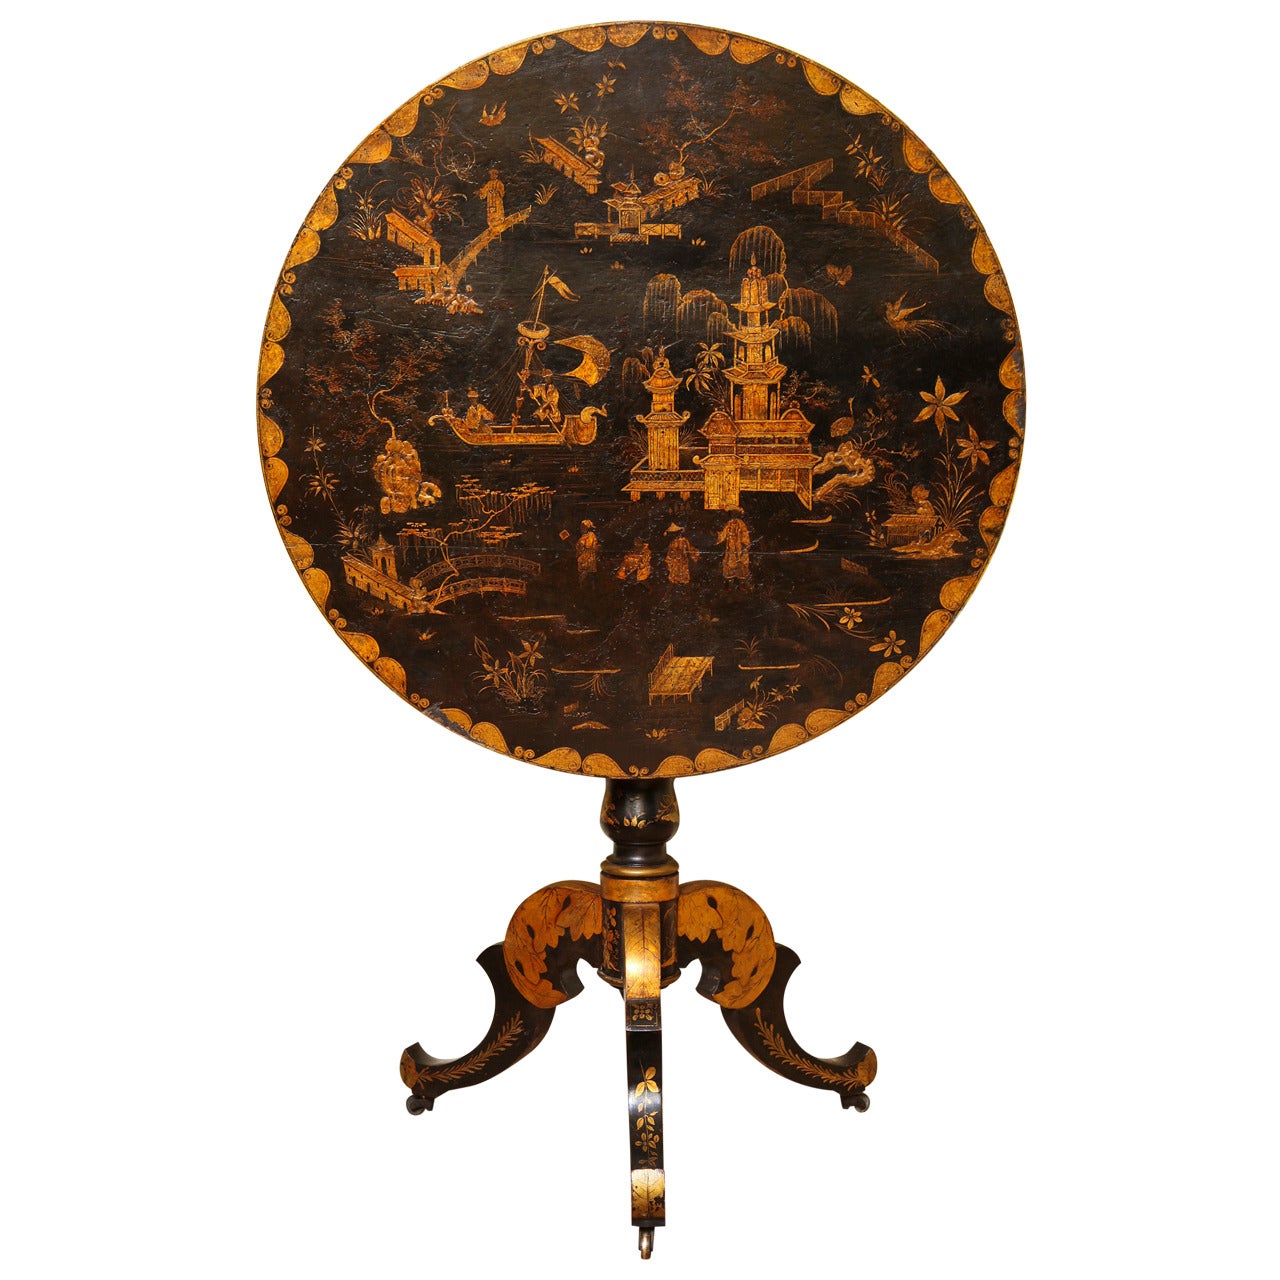 Japanned Chinoiserie Gilt Decorated Circular Tilt-Top Table, French, circa 1810 For Sale